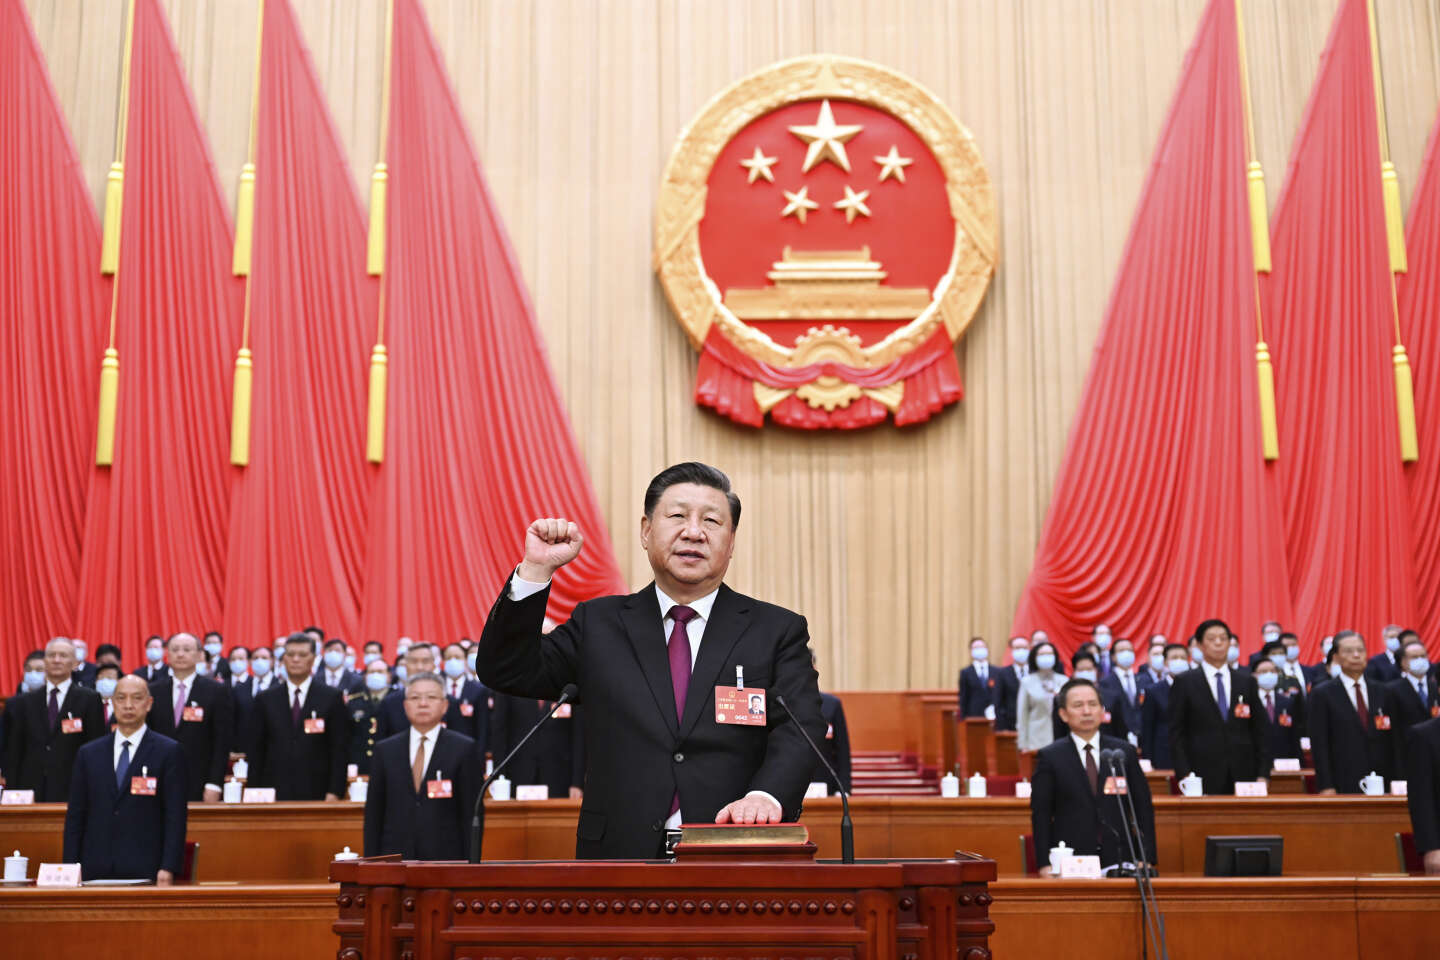 the plantar ambitions of Xi Jinping